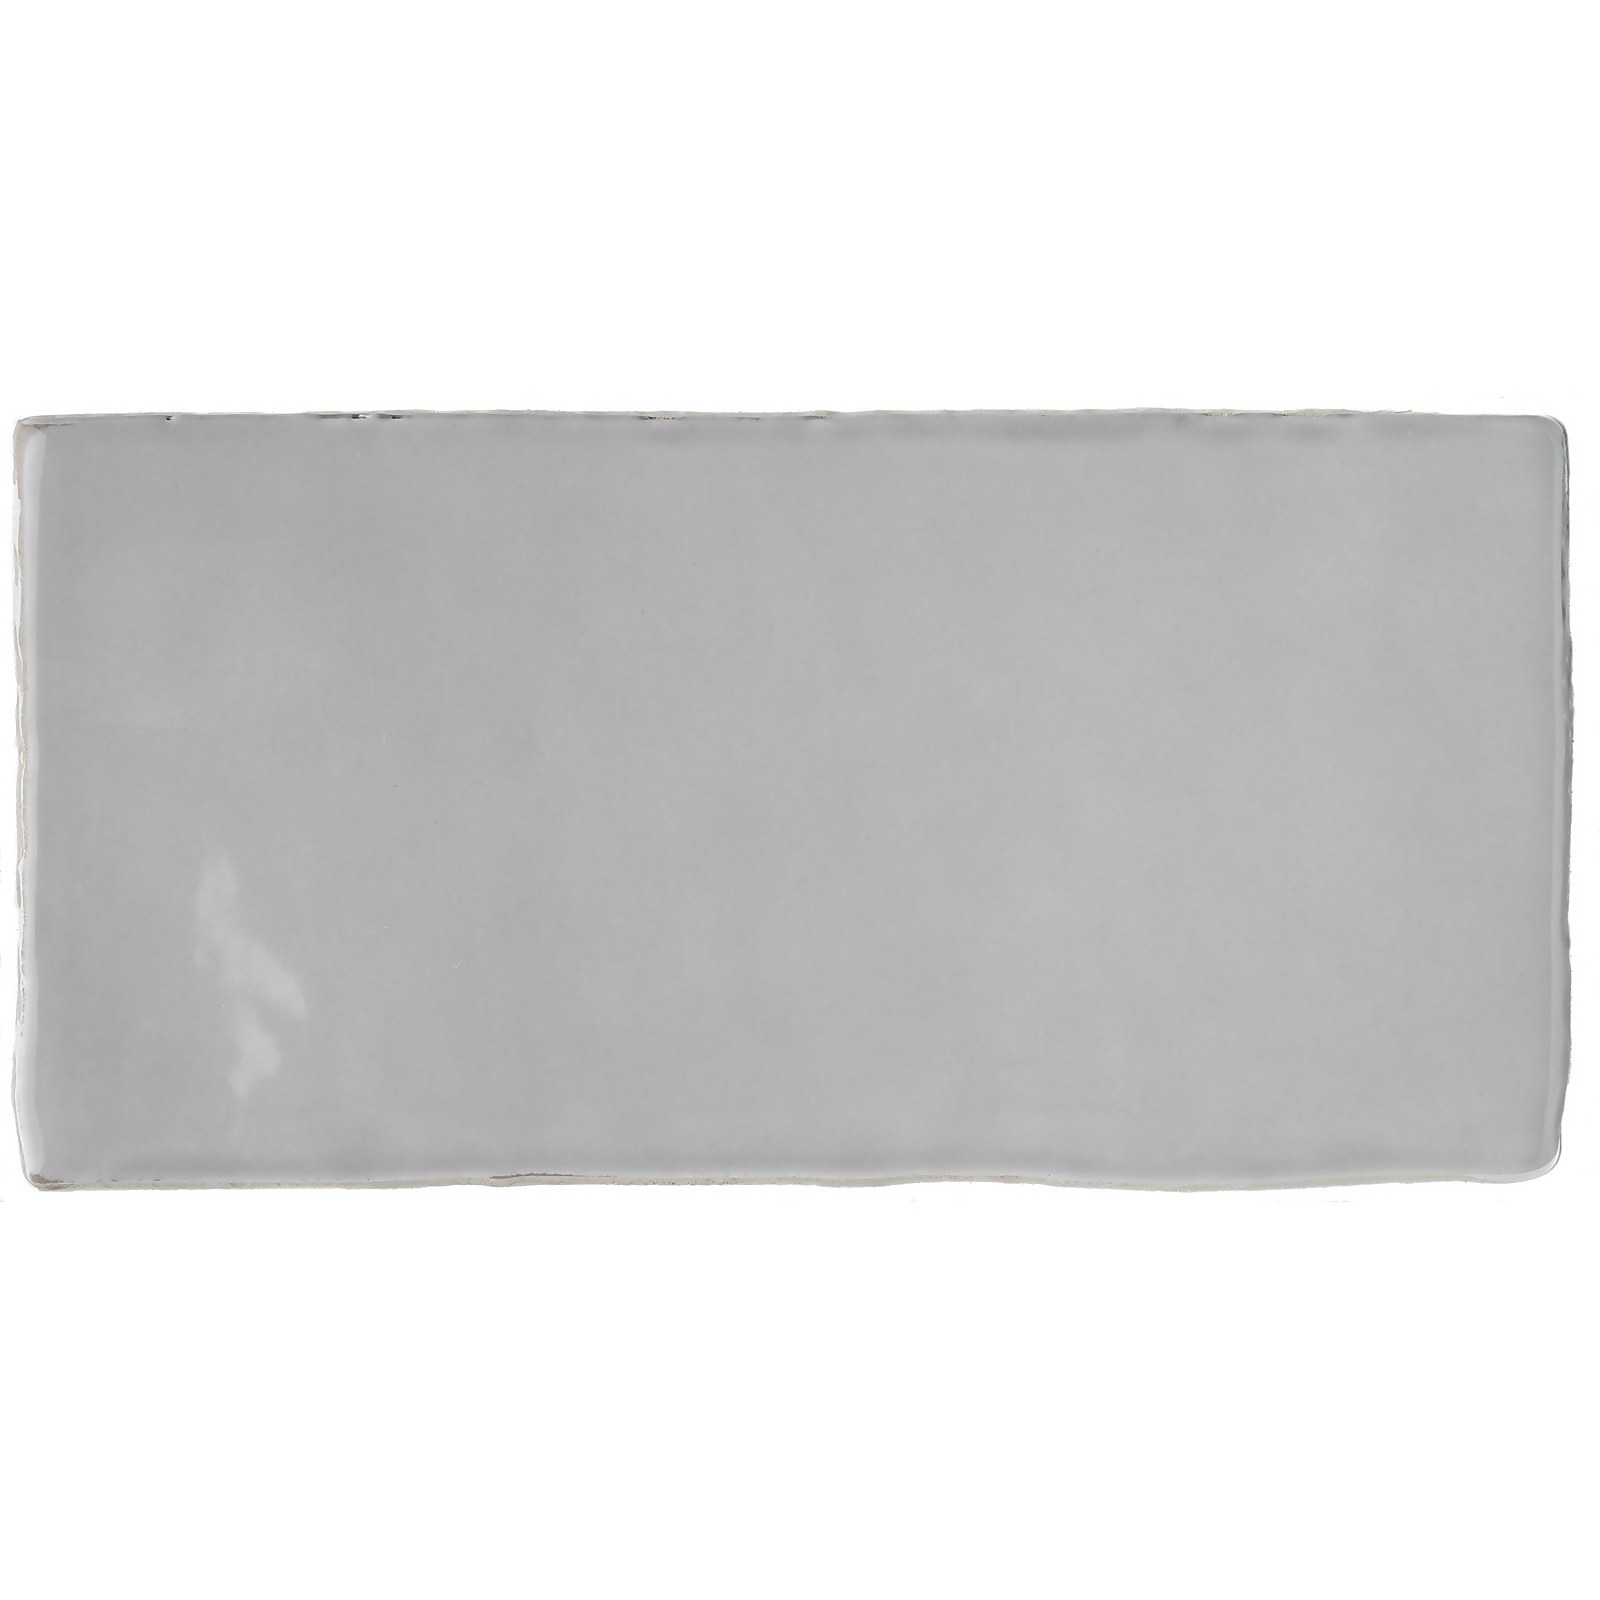 Photo of Country Living Artisan Whisper Grey Ceramic Wall Tile 75 X 150mm - 0.5sqm Pack